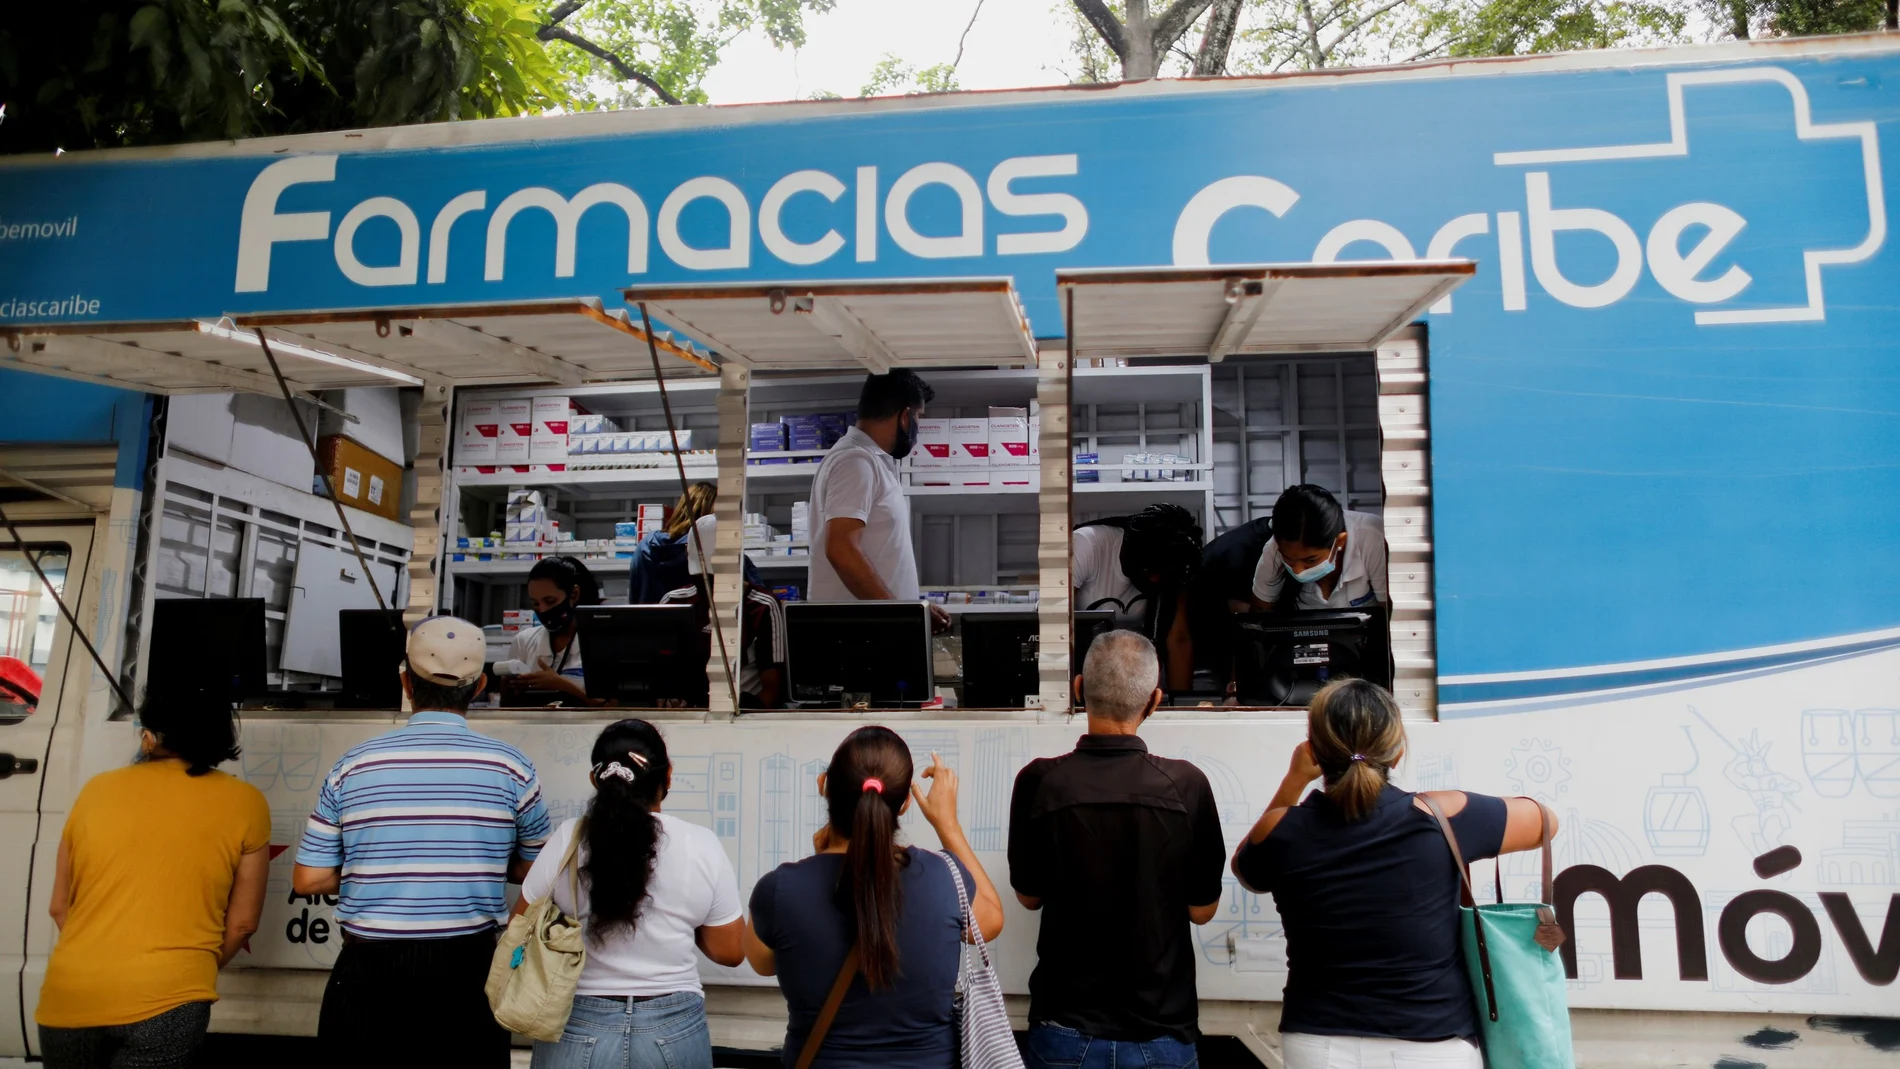 People buy medicines from a pharmacy truck amid a spike in infections of the coronavirus disease (COVID-19) that has led the government to extend lockdown measures, in Caracas, Venezuela April 6, 2021. REUTERS/Leonardo Fernandez Viloria NO RESALES. NO ARCHIVES